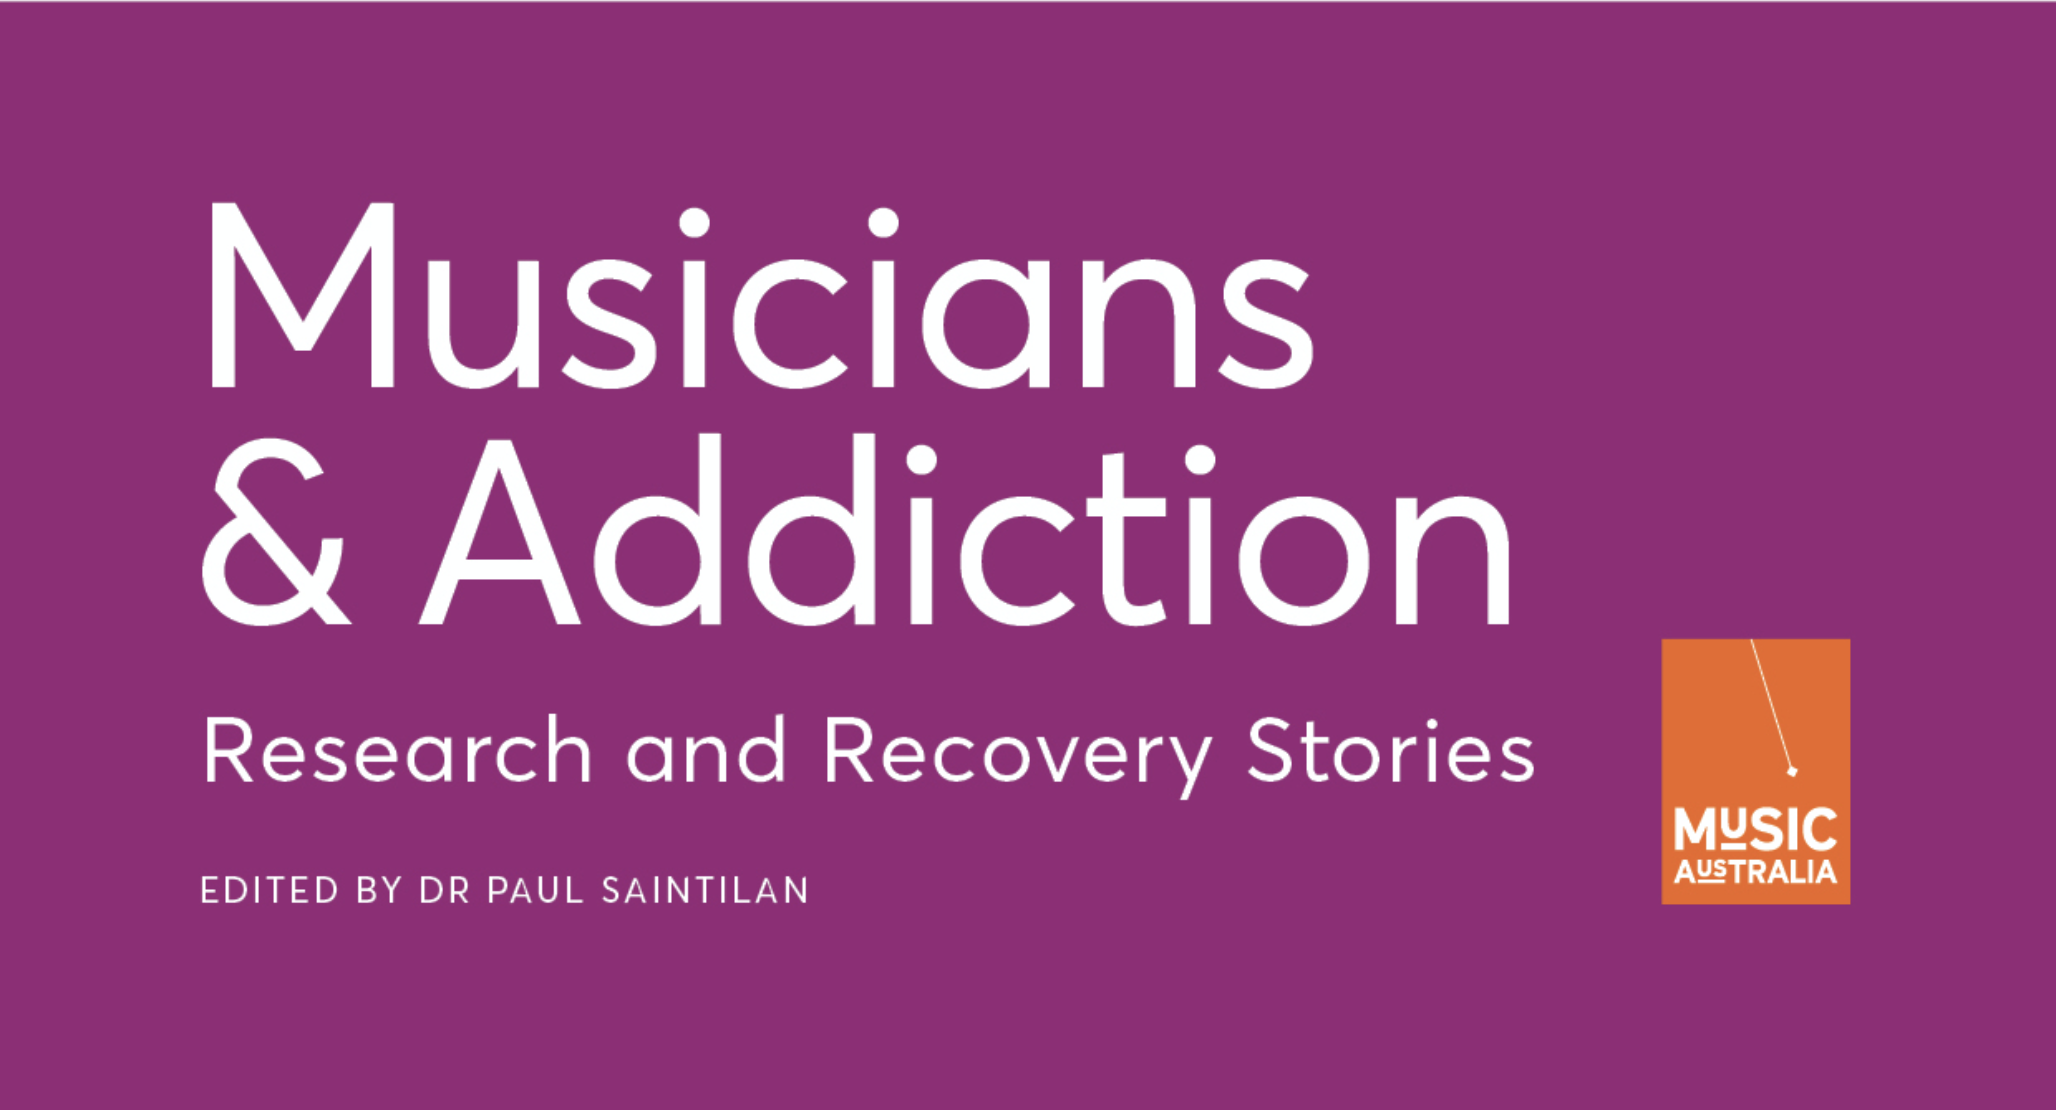 Musicians and Addiction